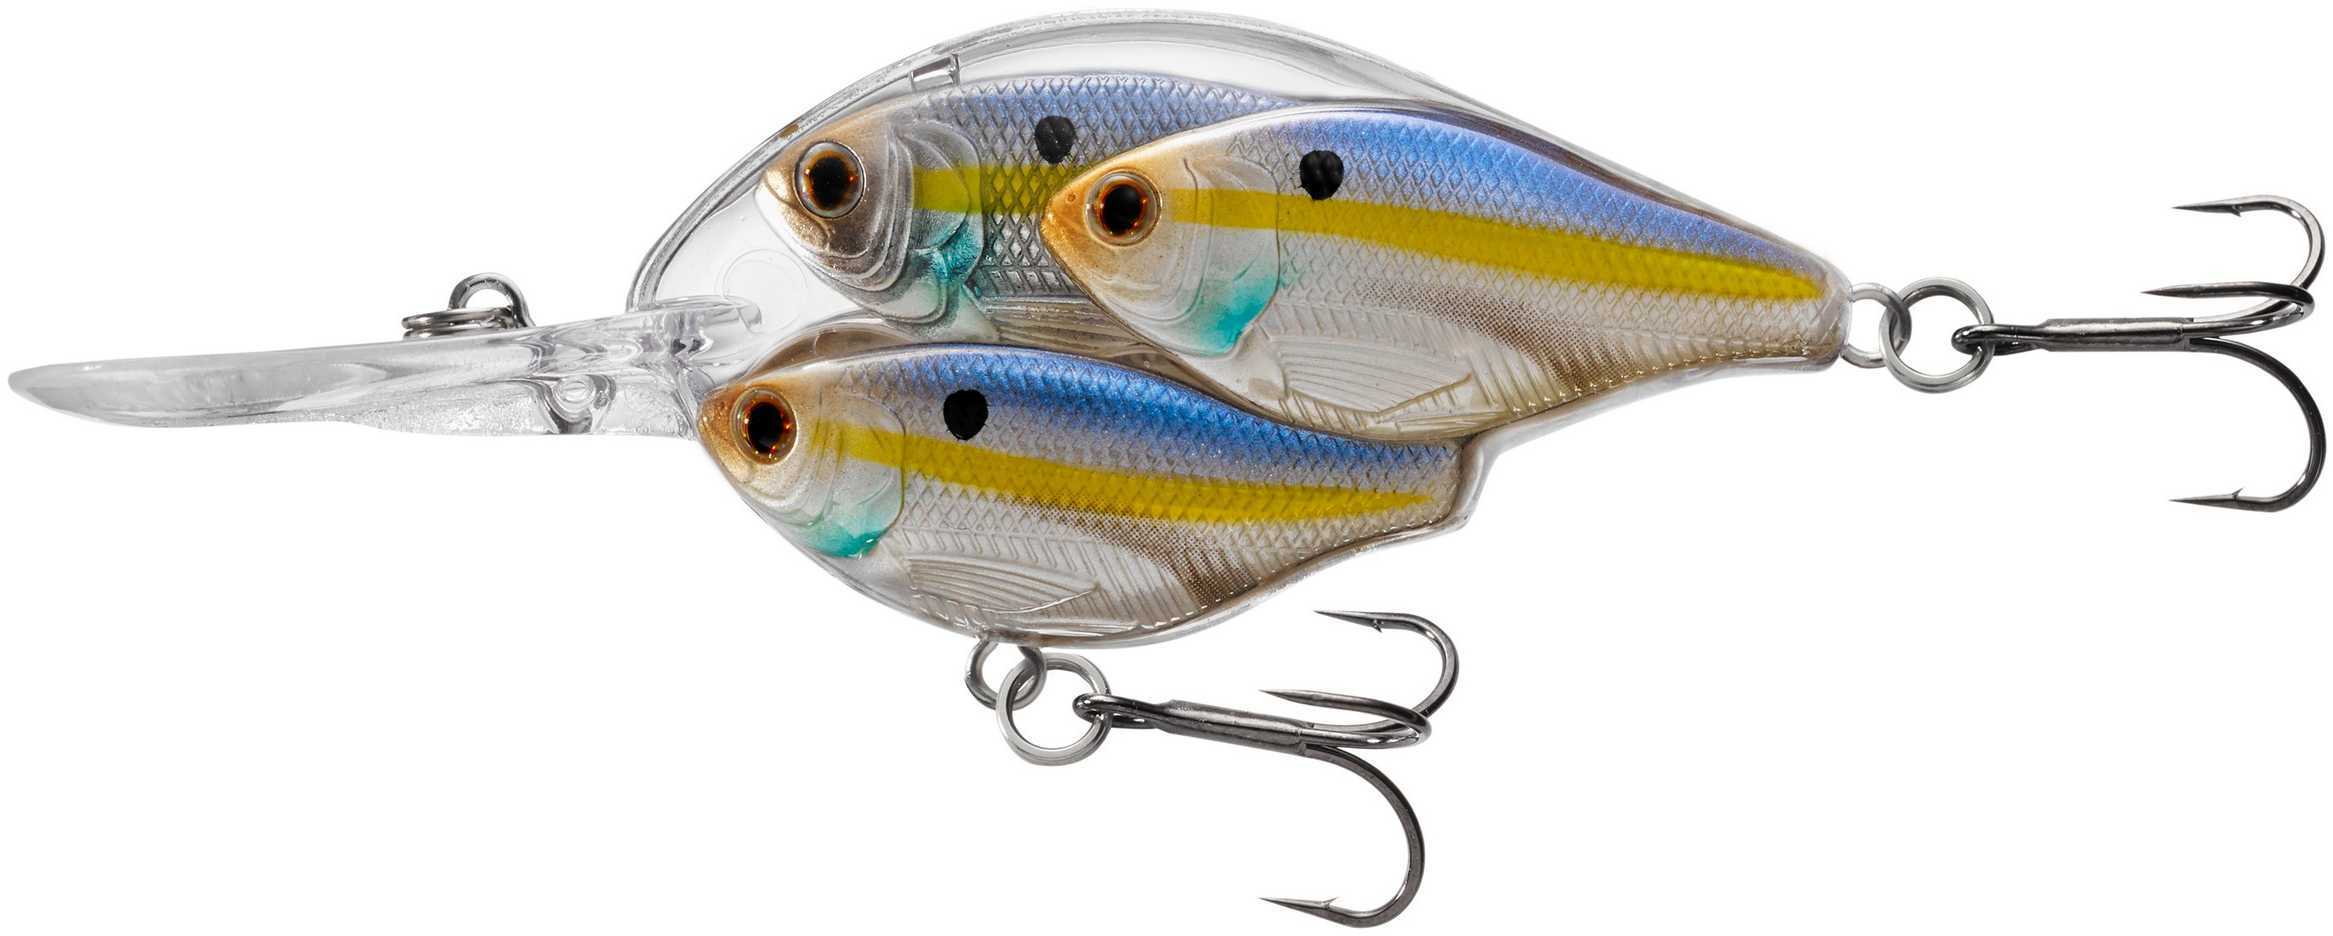 LIVETARGET Lures / Koppers Fishing and Tackle Corp Threadfin Shad Juvenile Bait Ball Squarebill Pearl/Violet #6 Medium Dive Md: TSB65M812